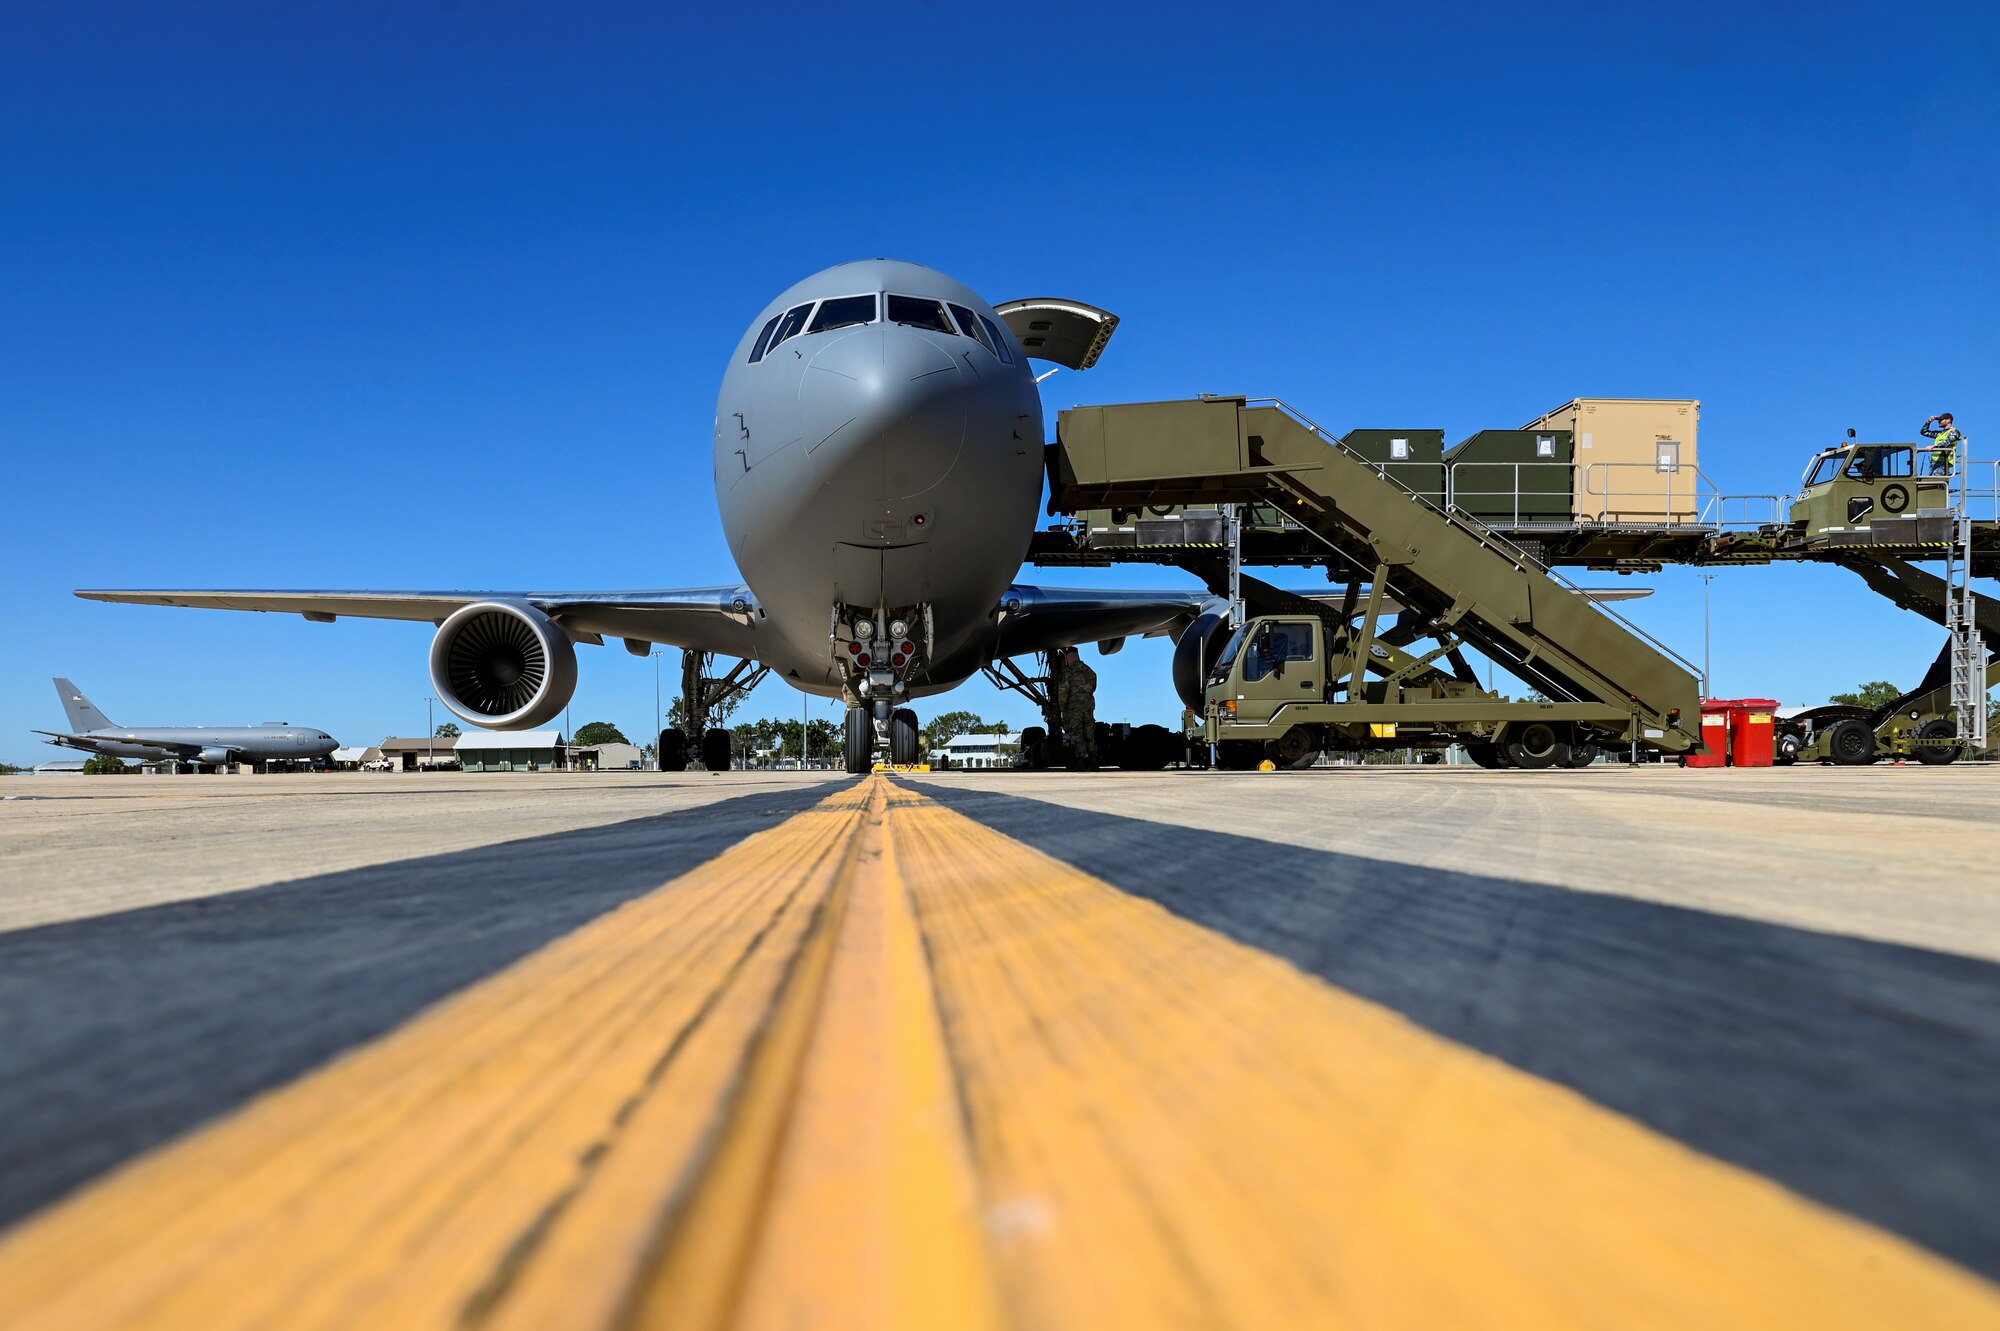 Royal Australian Air Force and 92nd Expeditionary Wing personnel prepare to get multiple KC-46 Pegasus airborne for Mobility Guardian 23 in Darwin, Australia, on July 9, 2023. A multinational endeavor, MG23 featured seven participating countries – Australia, Canada, France, Japan, New Zealand, the United Kingdom, and the United States – operating nearly 70 mobility aircraft across multiple locations spanning a 3,000-mile area in the Indo-Pacific. (U.S. Air Force photo by Airman 1st Class Haiden Morris)